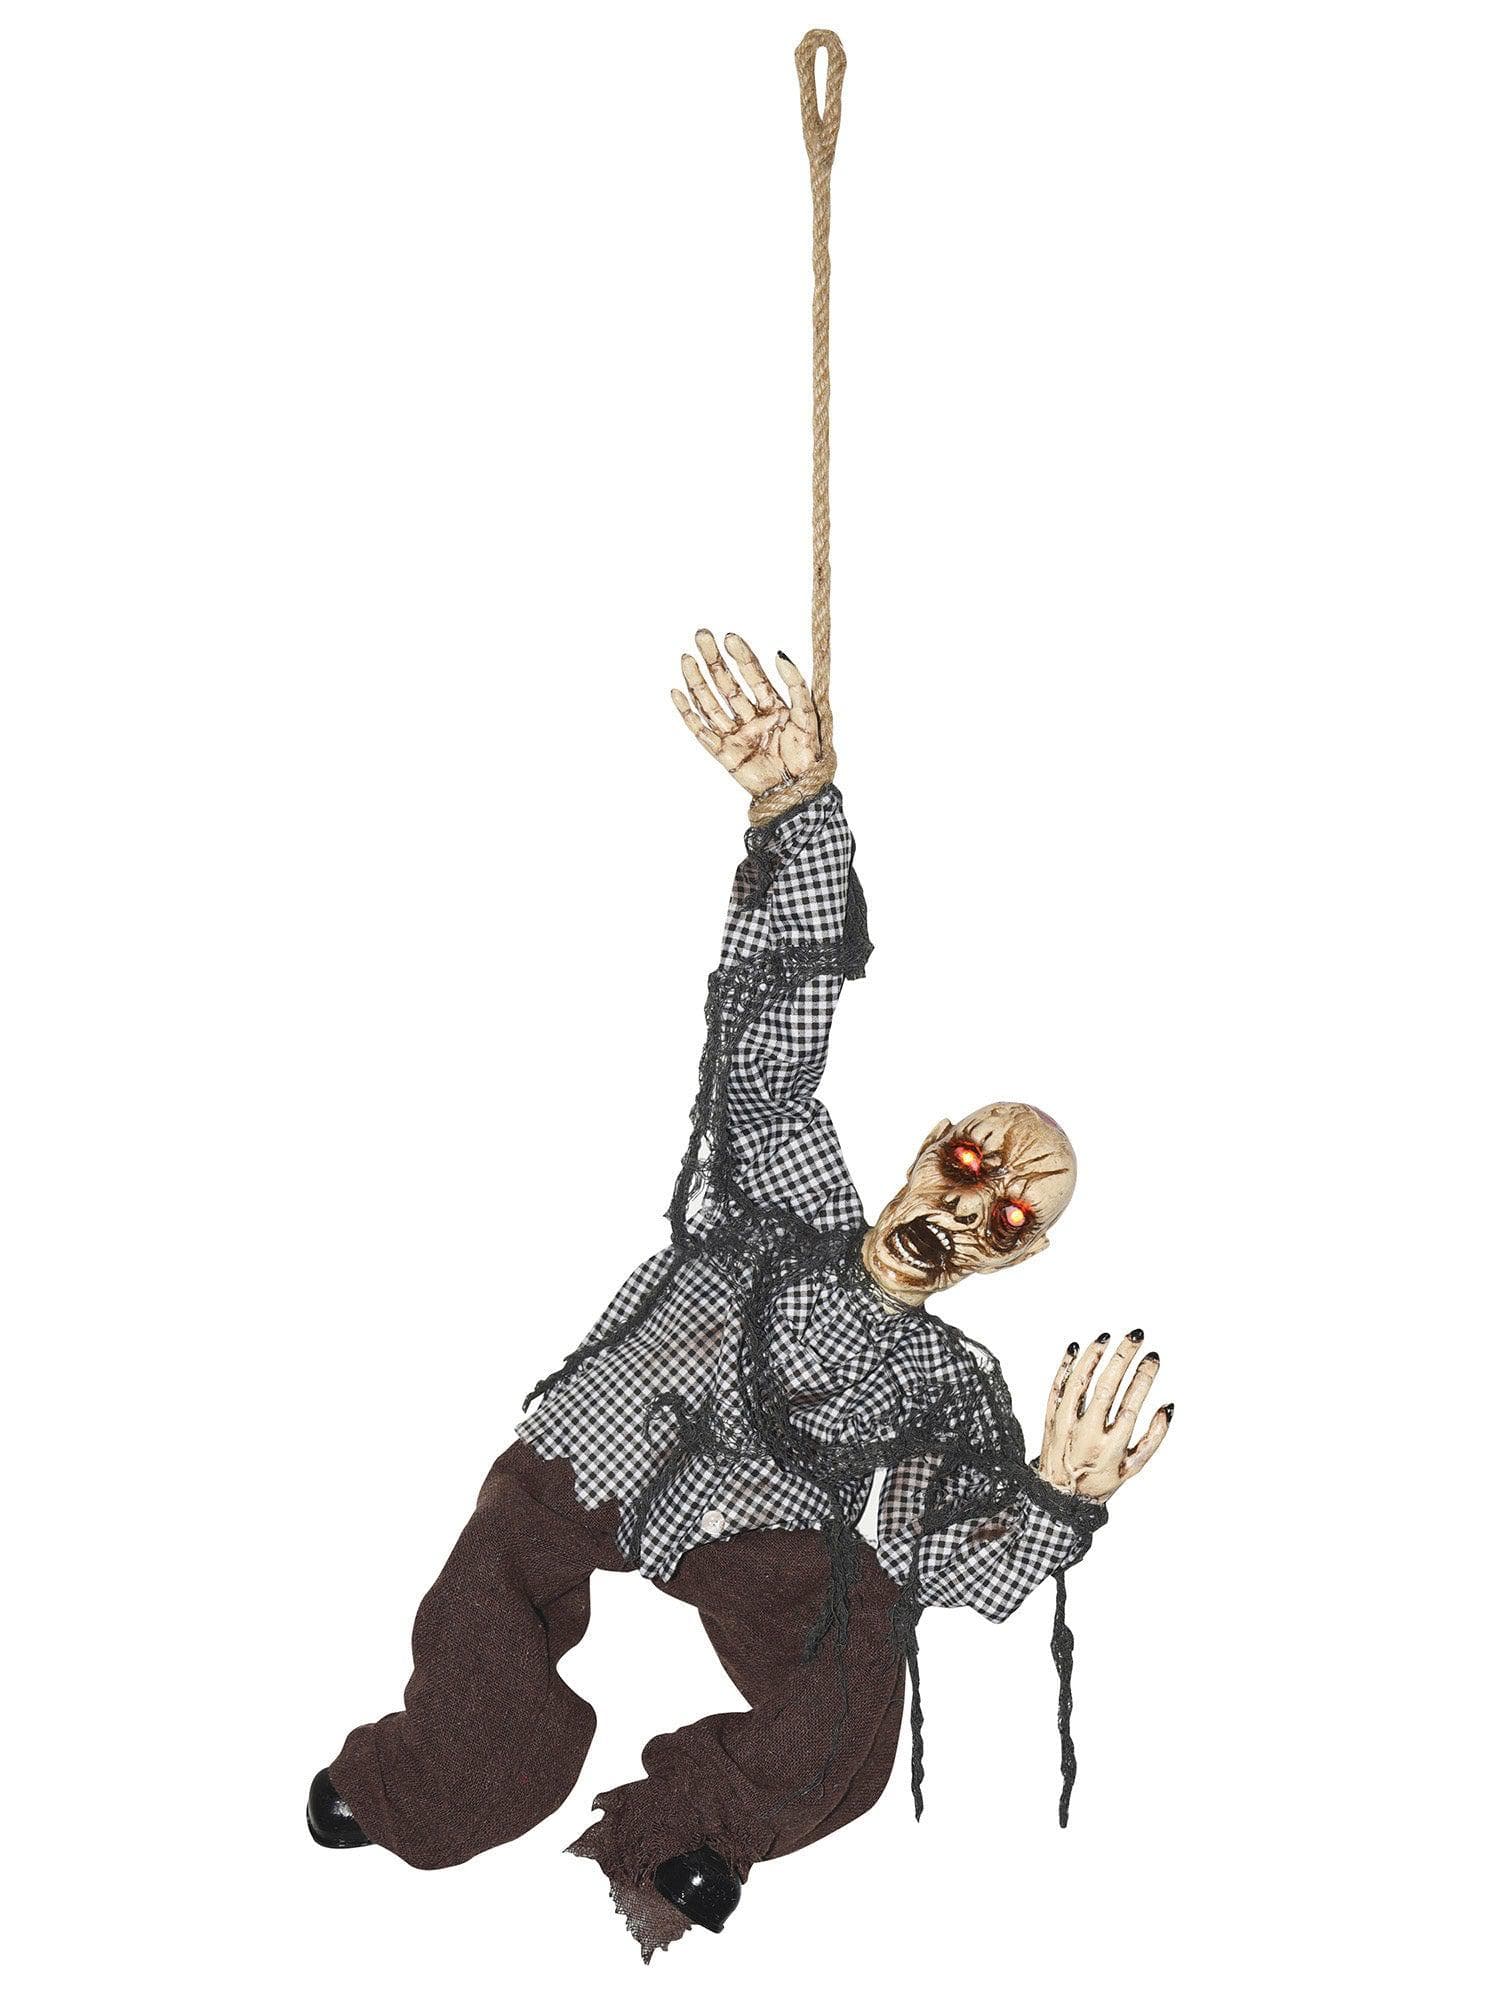 2 Foot Hanging Zombie Man Light Up Animated Prop - costumes.com